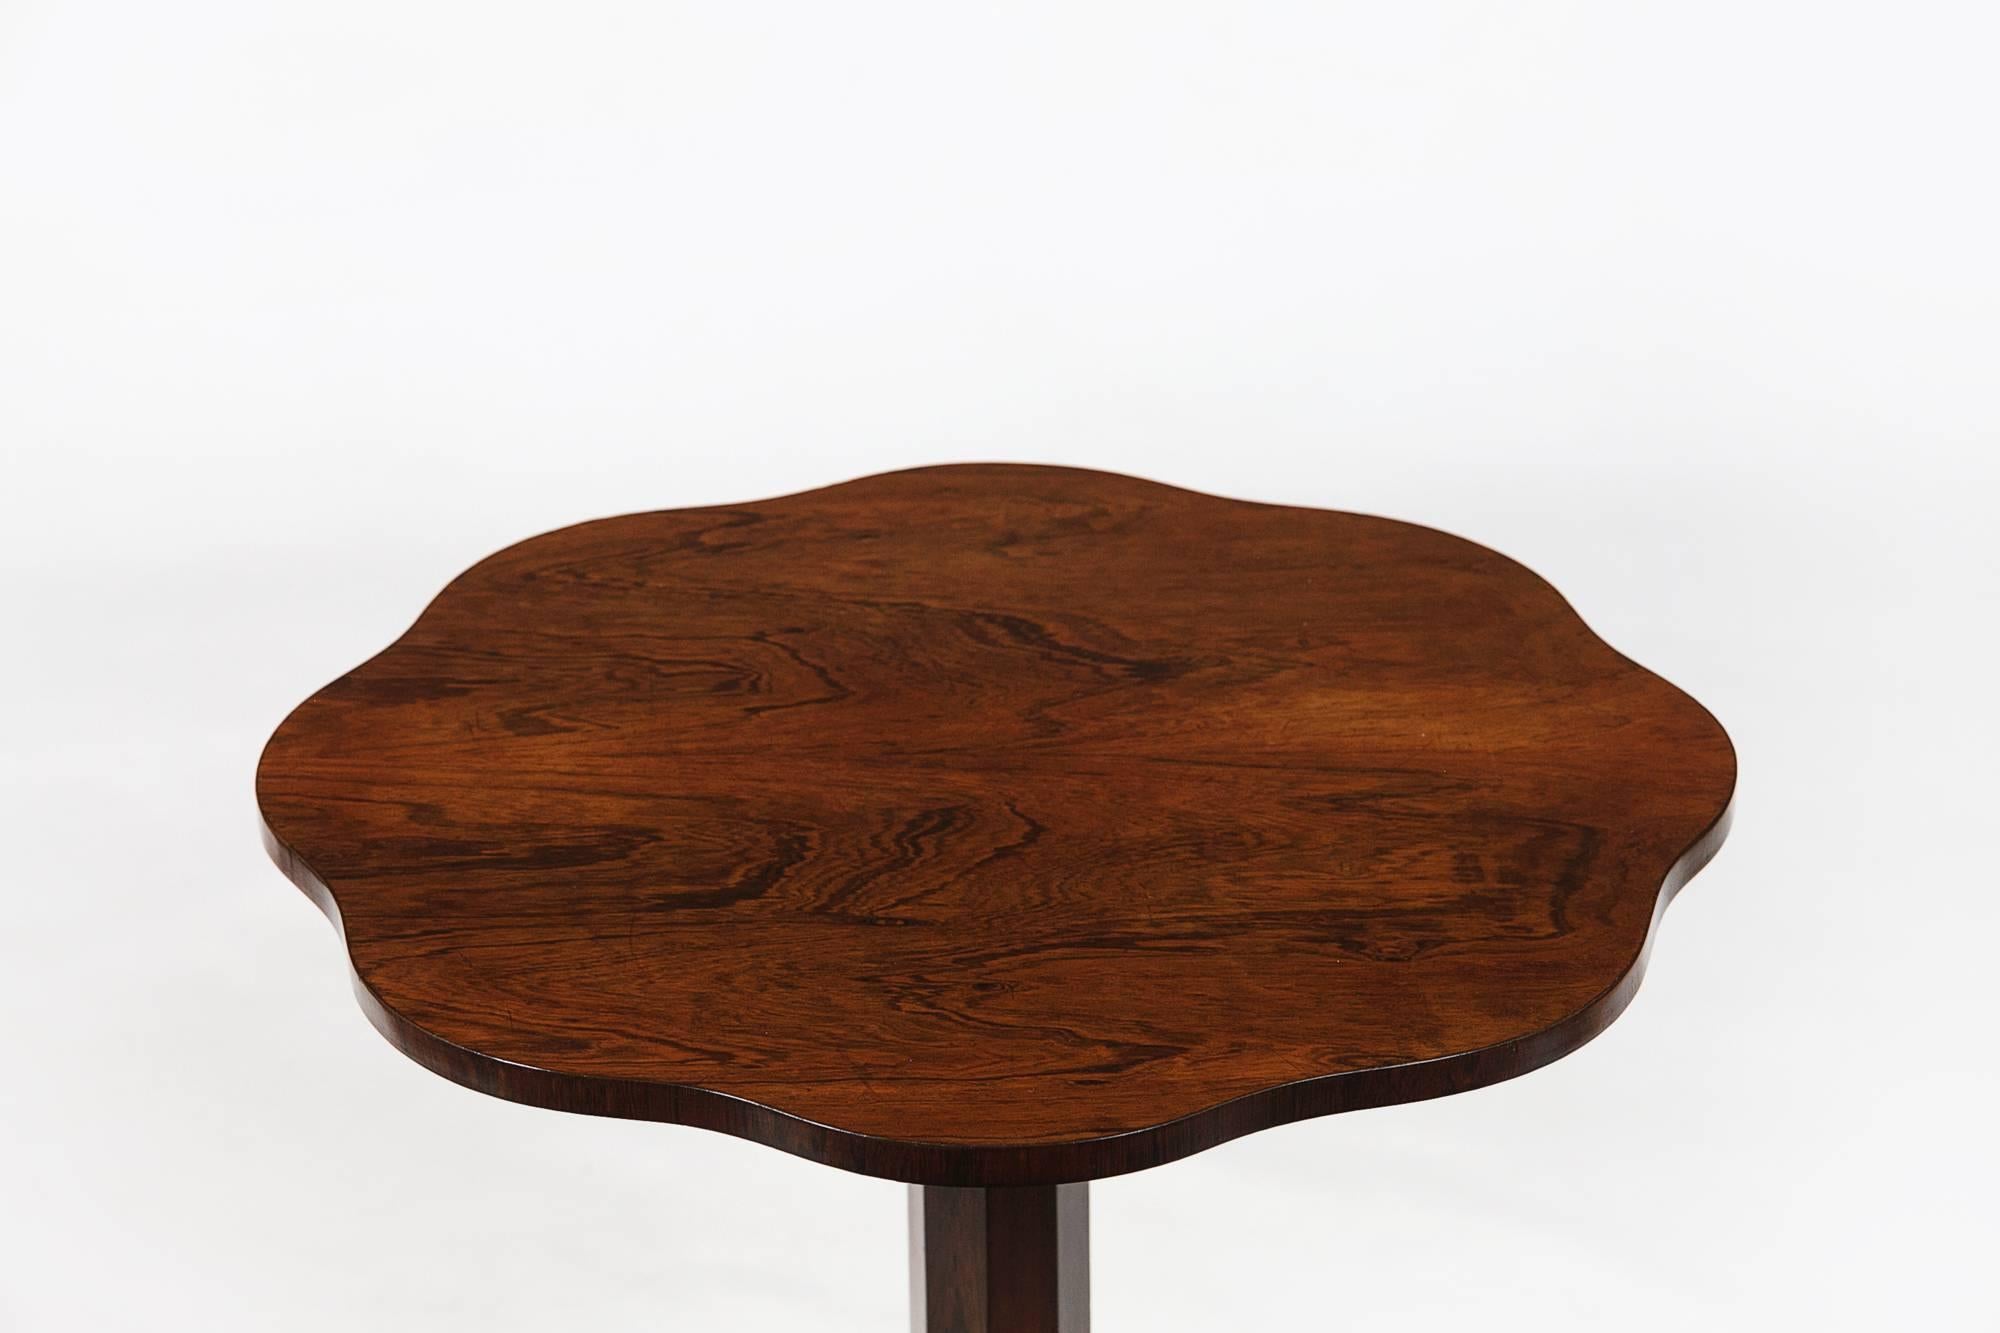 Early 19th century George III mahogany occasional table with shaped top standing on a beautiful carved tripod base.